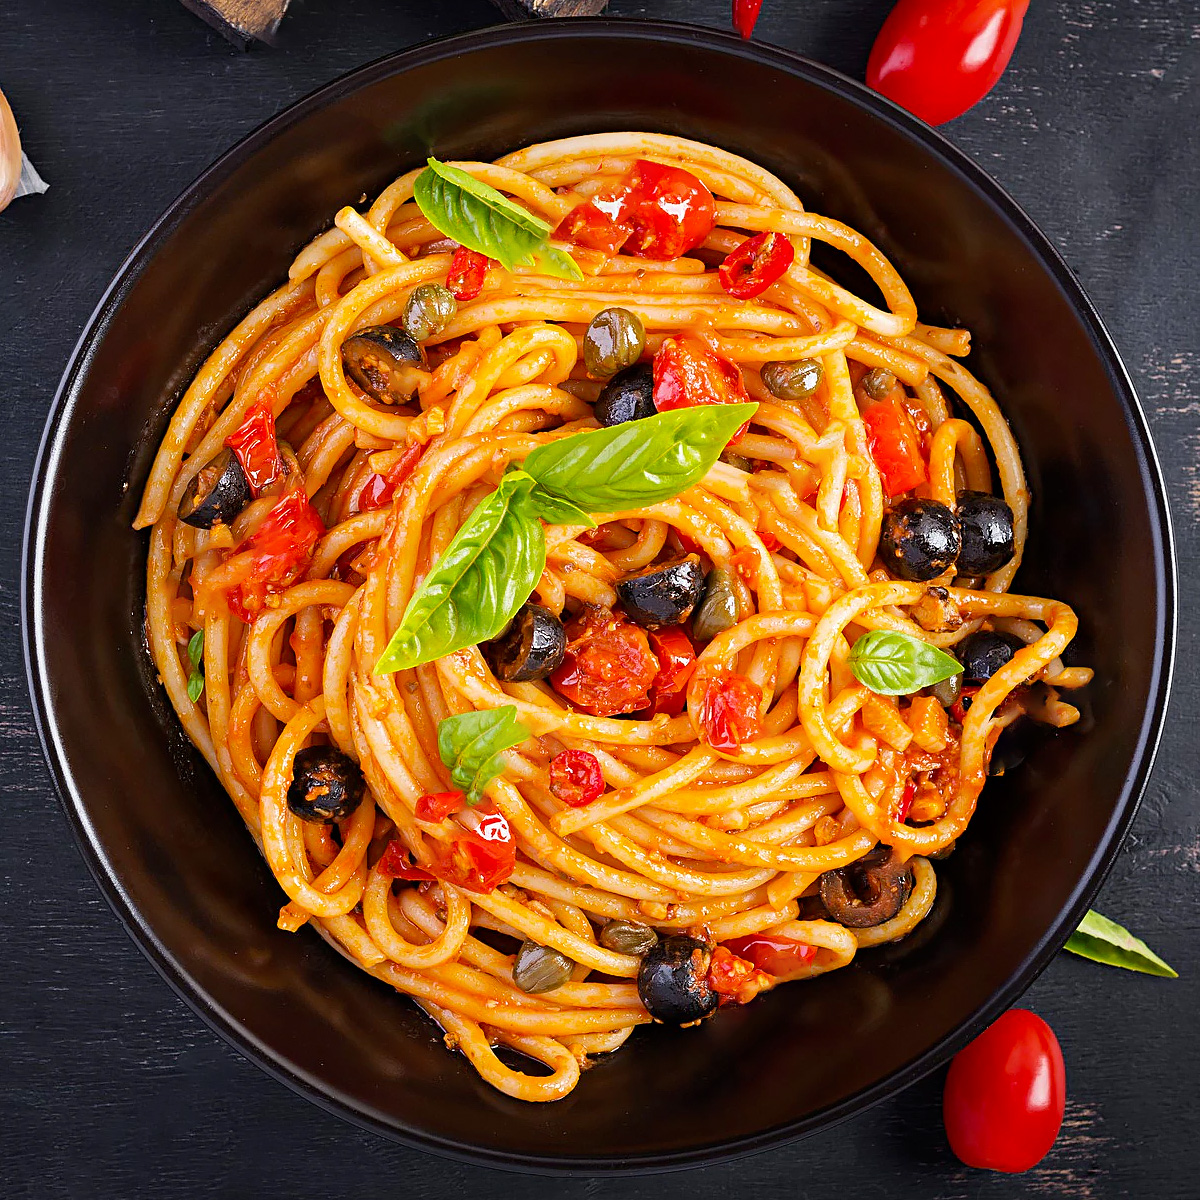 Top view of spaghetti cooked with black olives and tomatoes.